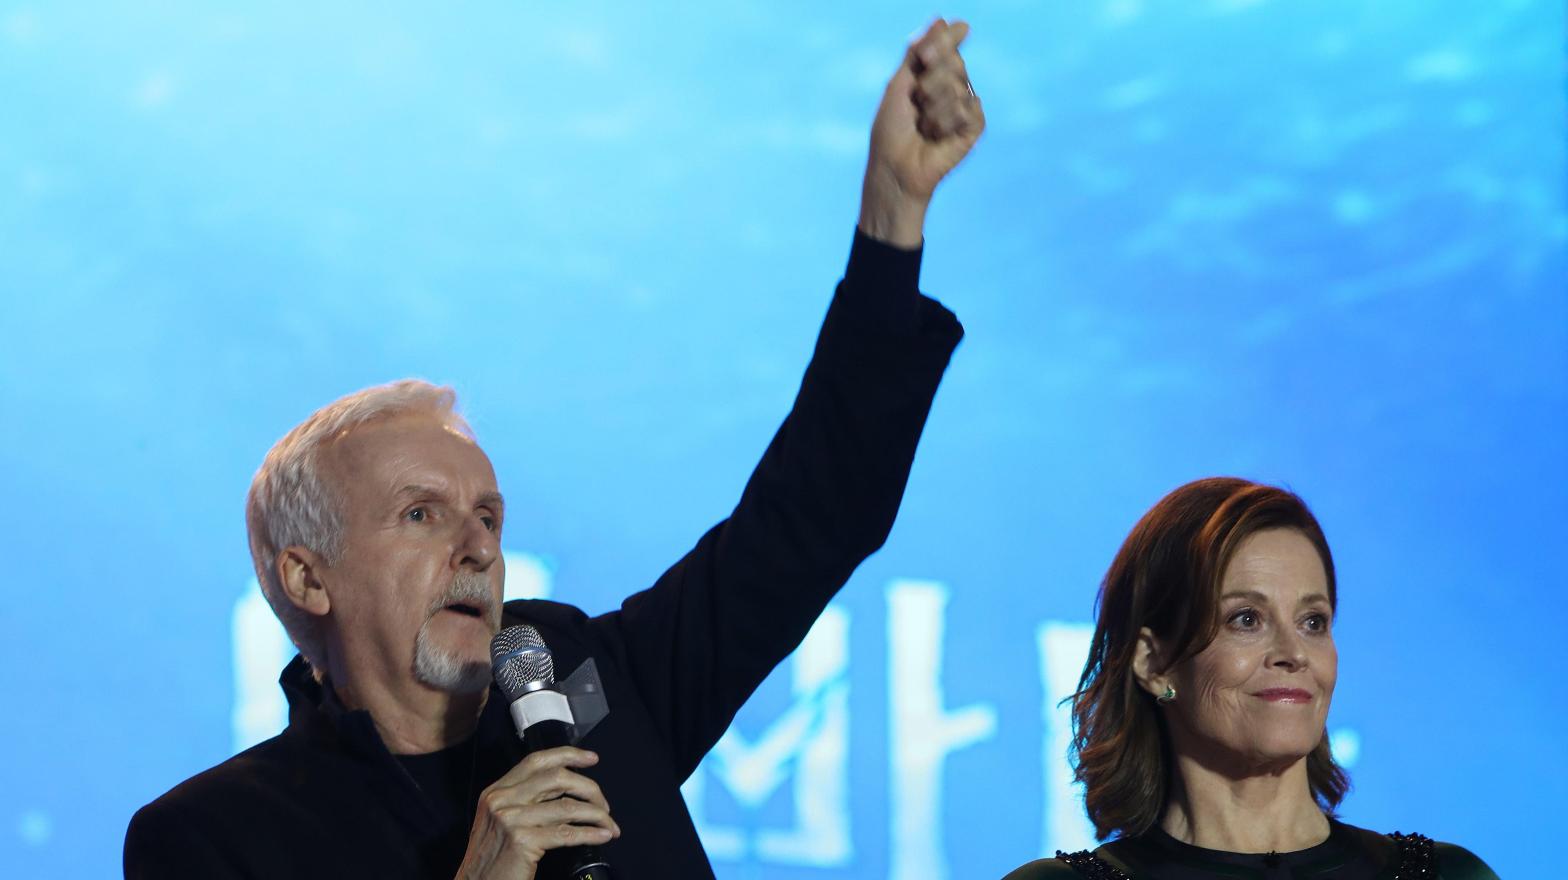 Director James Cameron and actress Sigourney Weaver attend the premiere of Avatar: The Way of Water on December 09, 2022 in Seoul, South Korea. (Photo: Chung Sung-Jun, Getty Images)